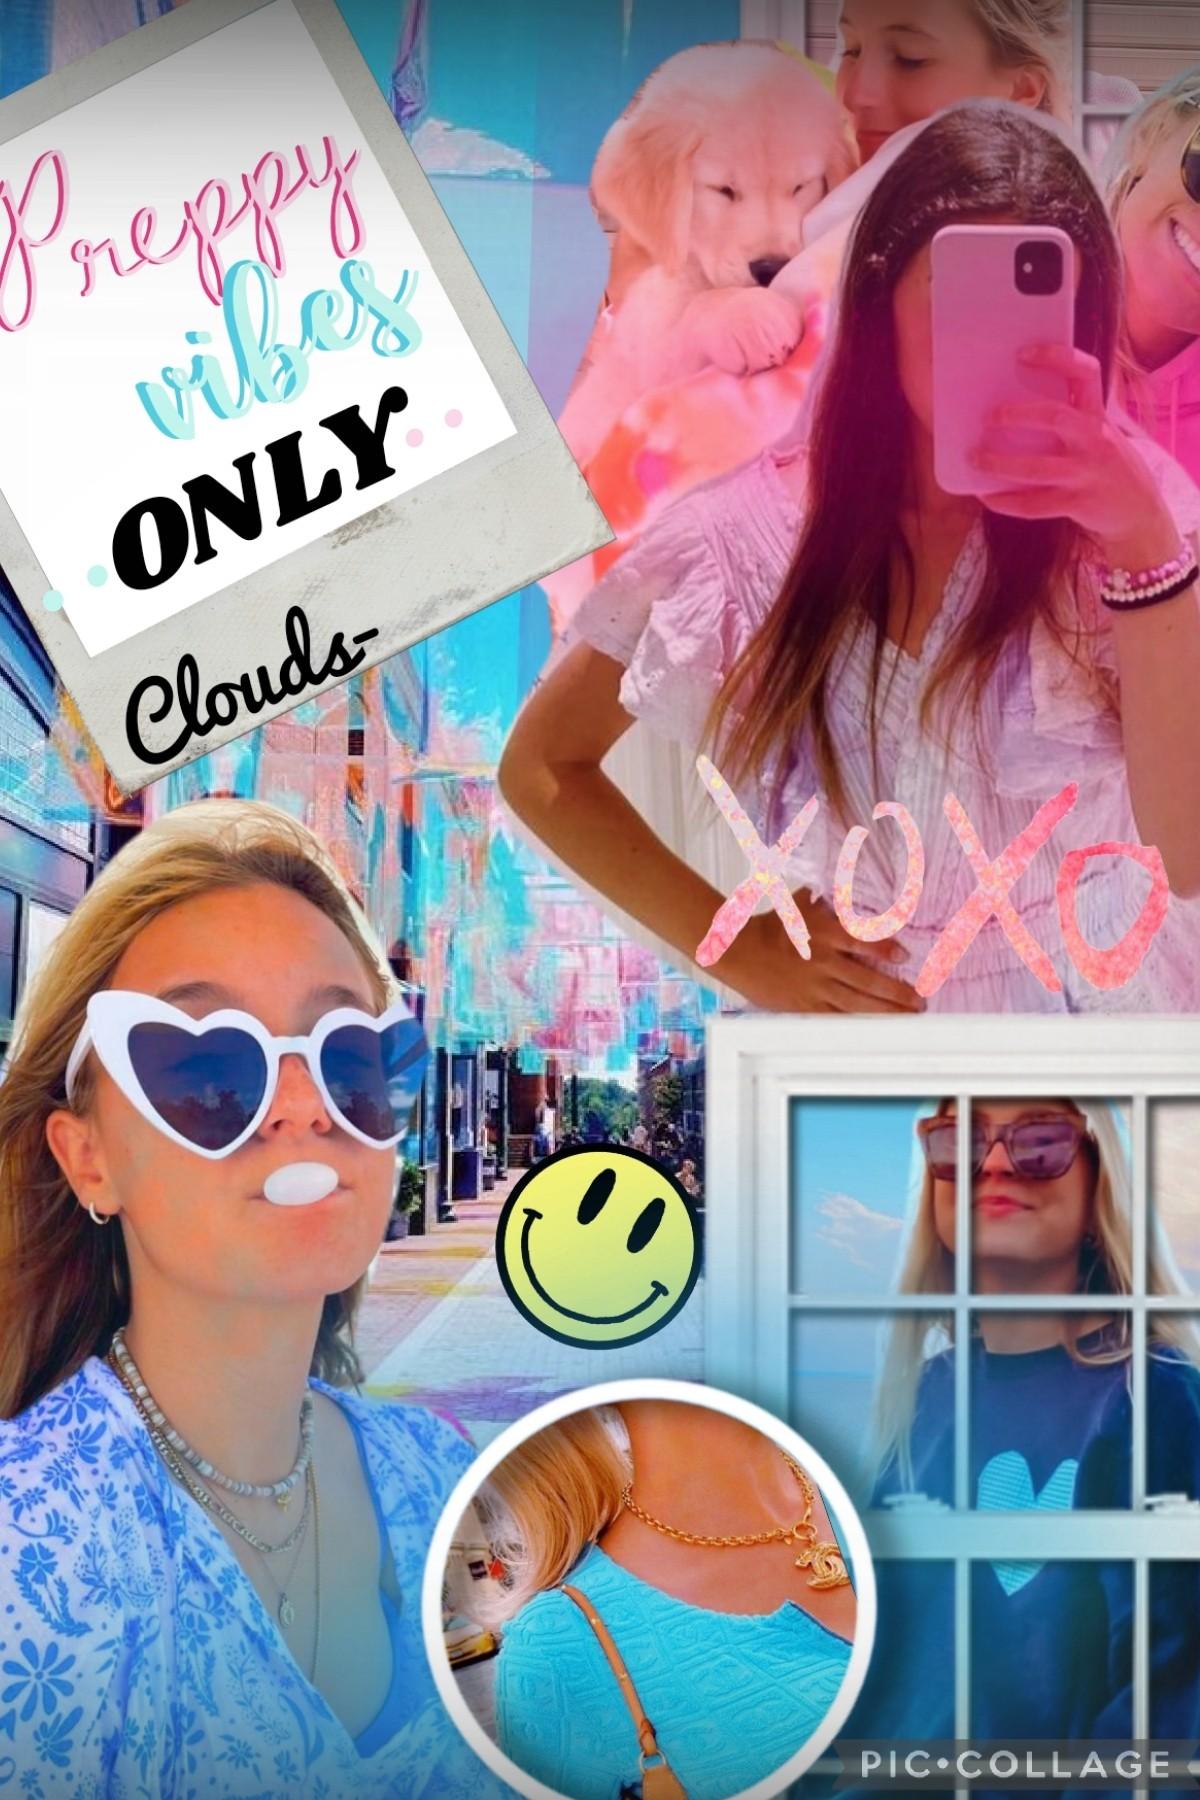              ⚡️tap⚡️

  heyy so I tried a new theme where I mixed blue preppy aesthetic with pink preppy aesthetic, ngl it was rly fun to make! 💕✨️ tell me ur thoughts on this! ❤️
 Inspo creds: Magnolia_Fields & Blossoms_
  QOTD: Favourite type of Pizza?
